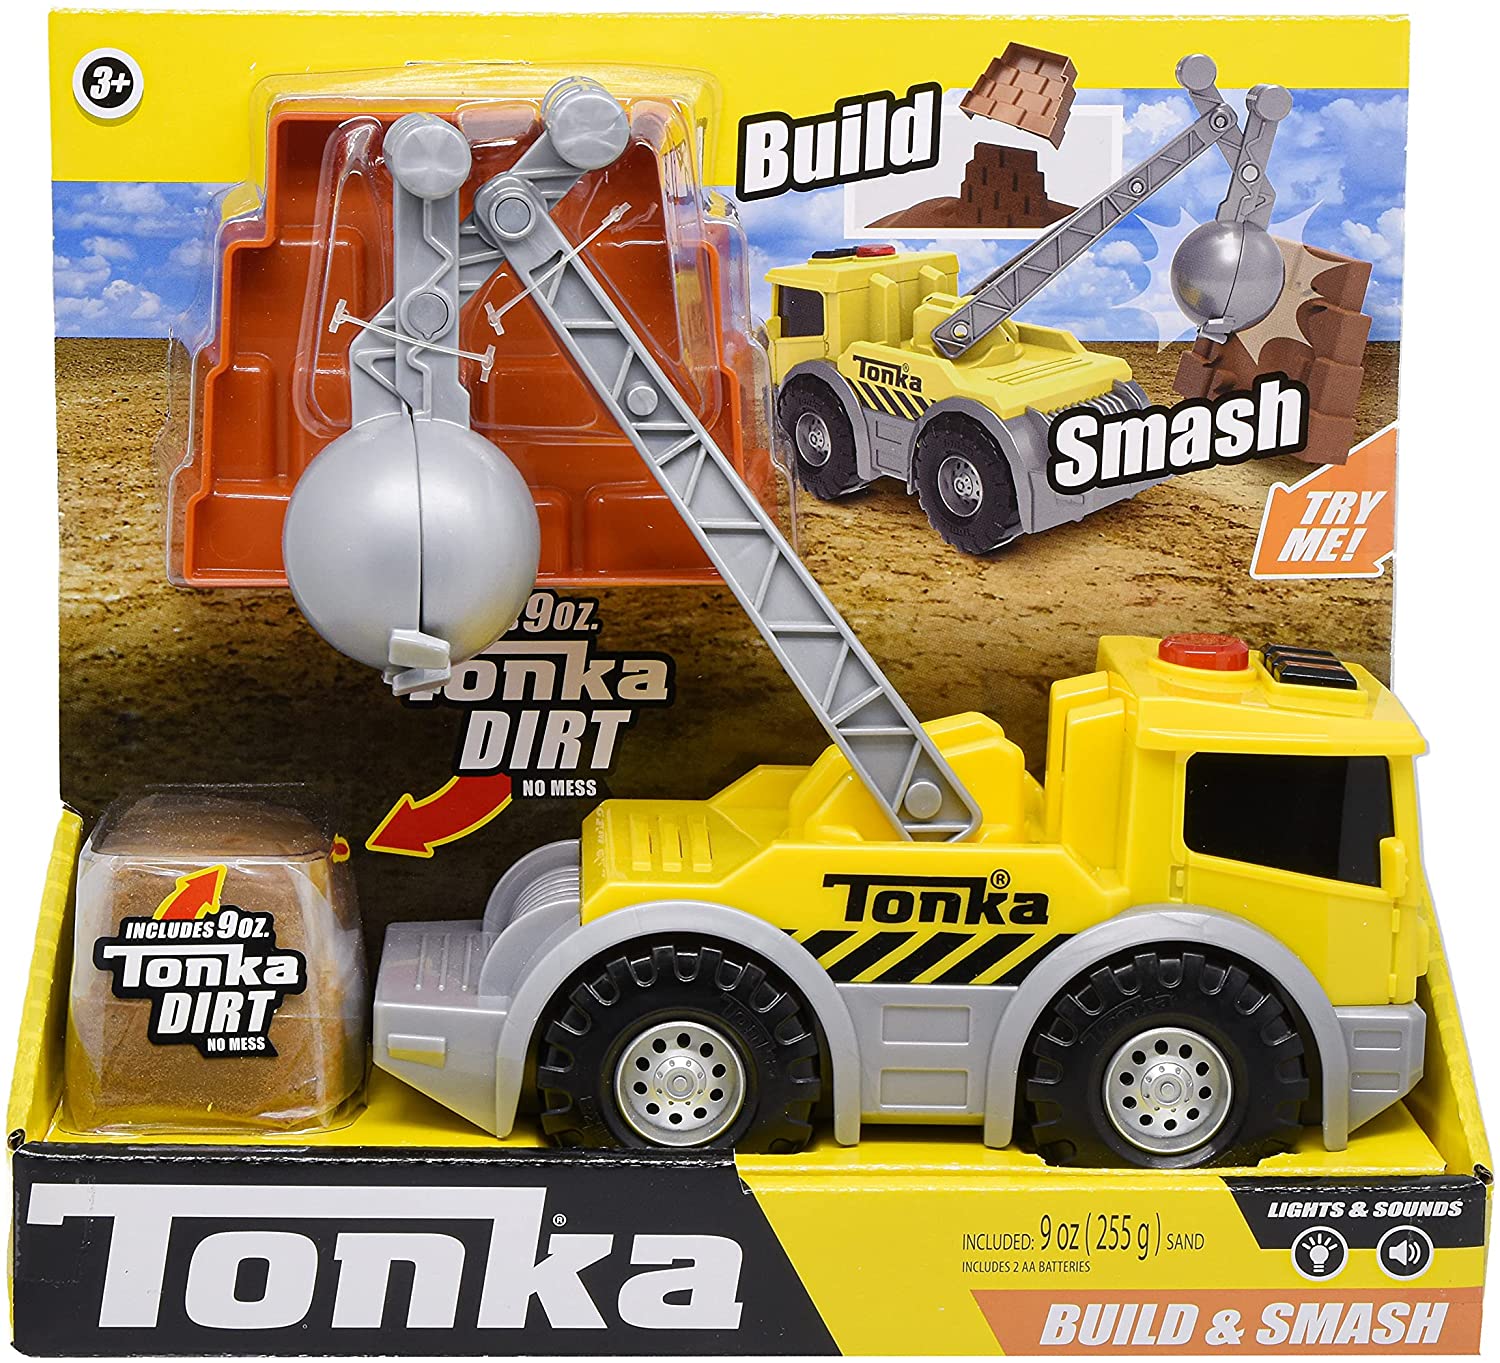 Tonka Build Smash Lights Sounds Toy W Accessories 4 07 Free Shipping W Amazon